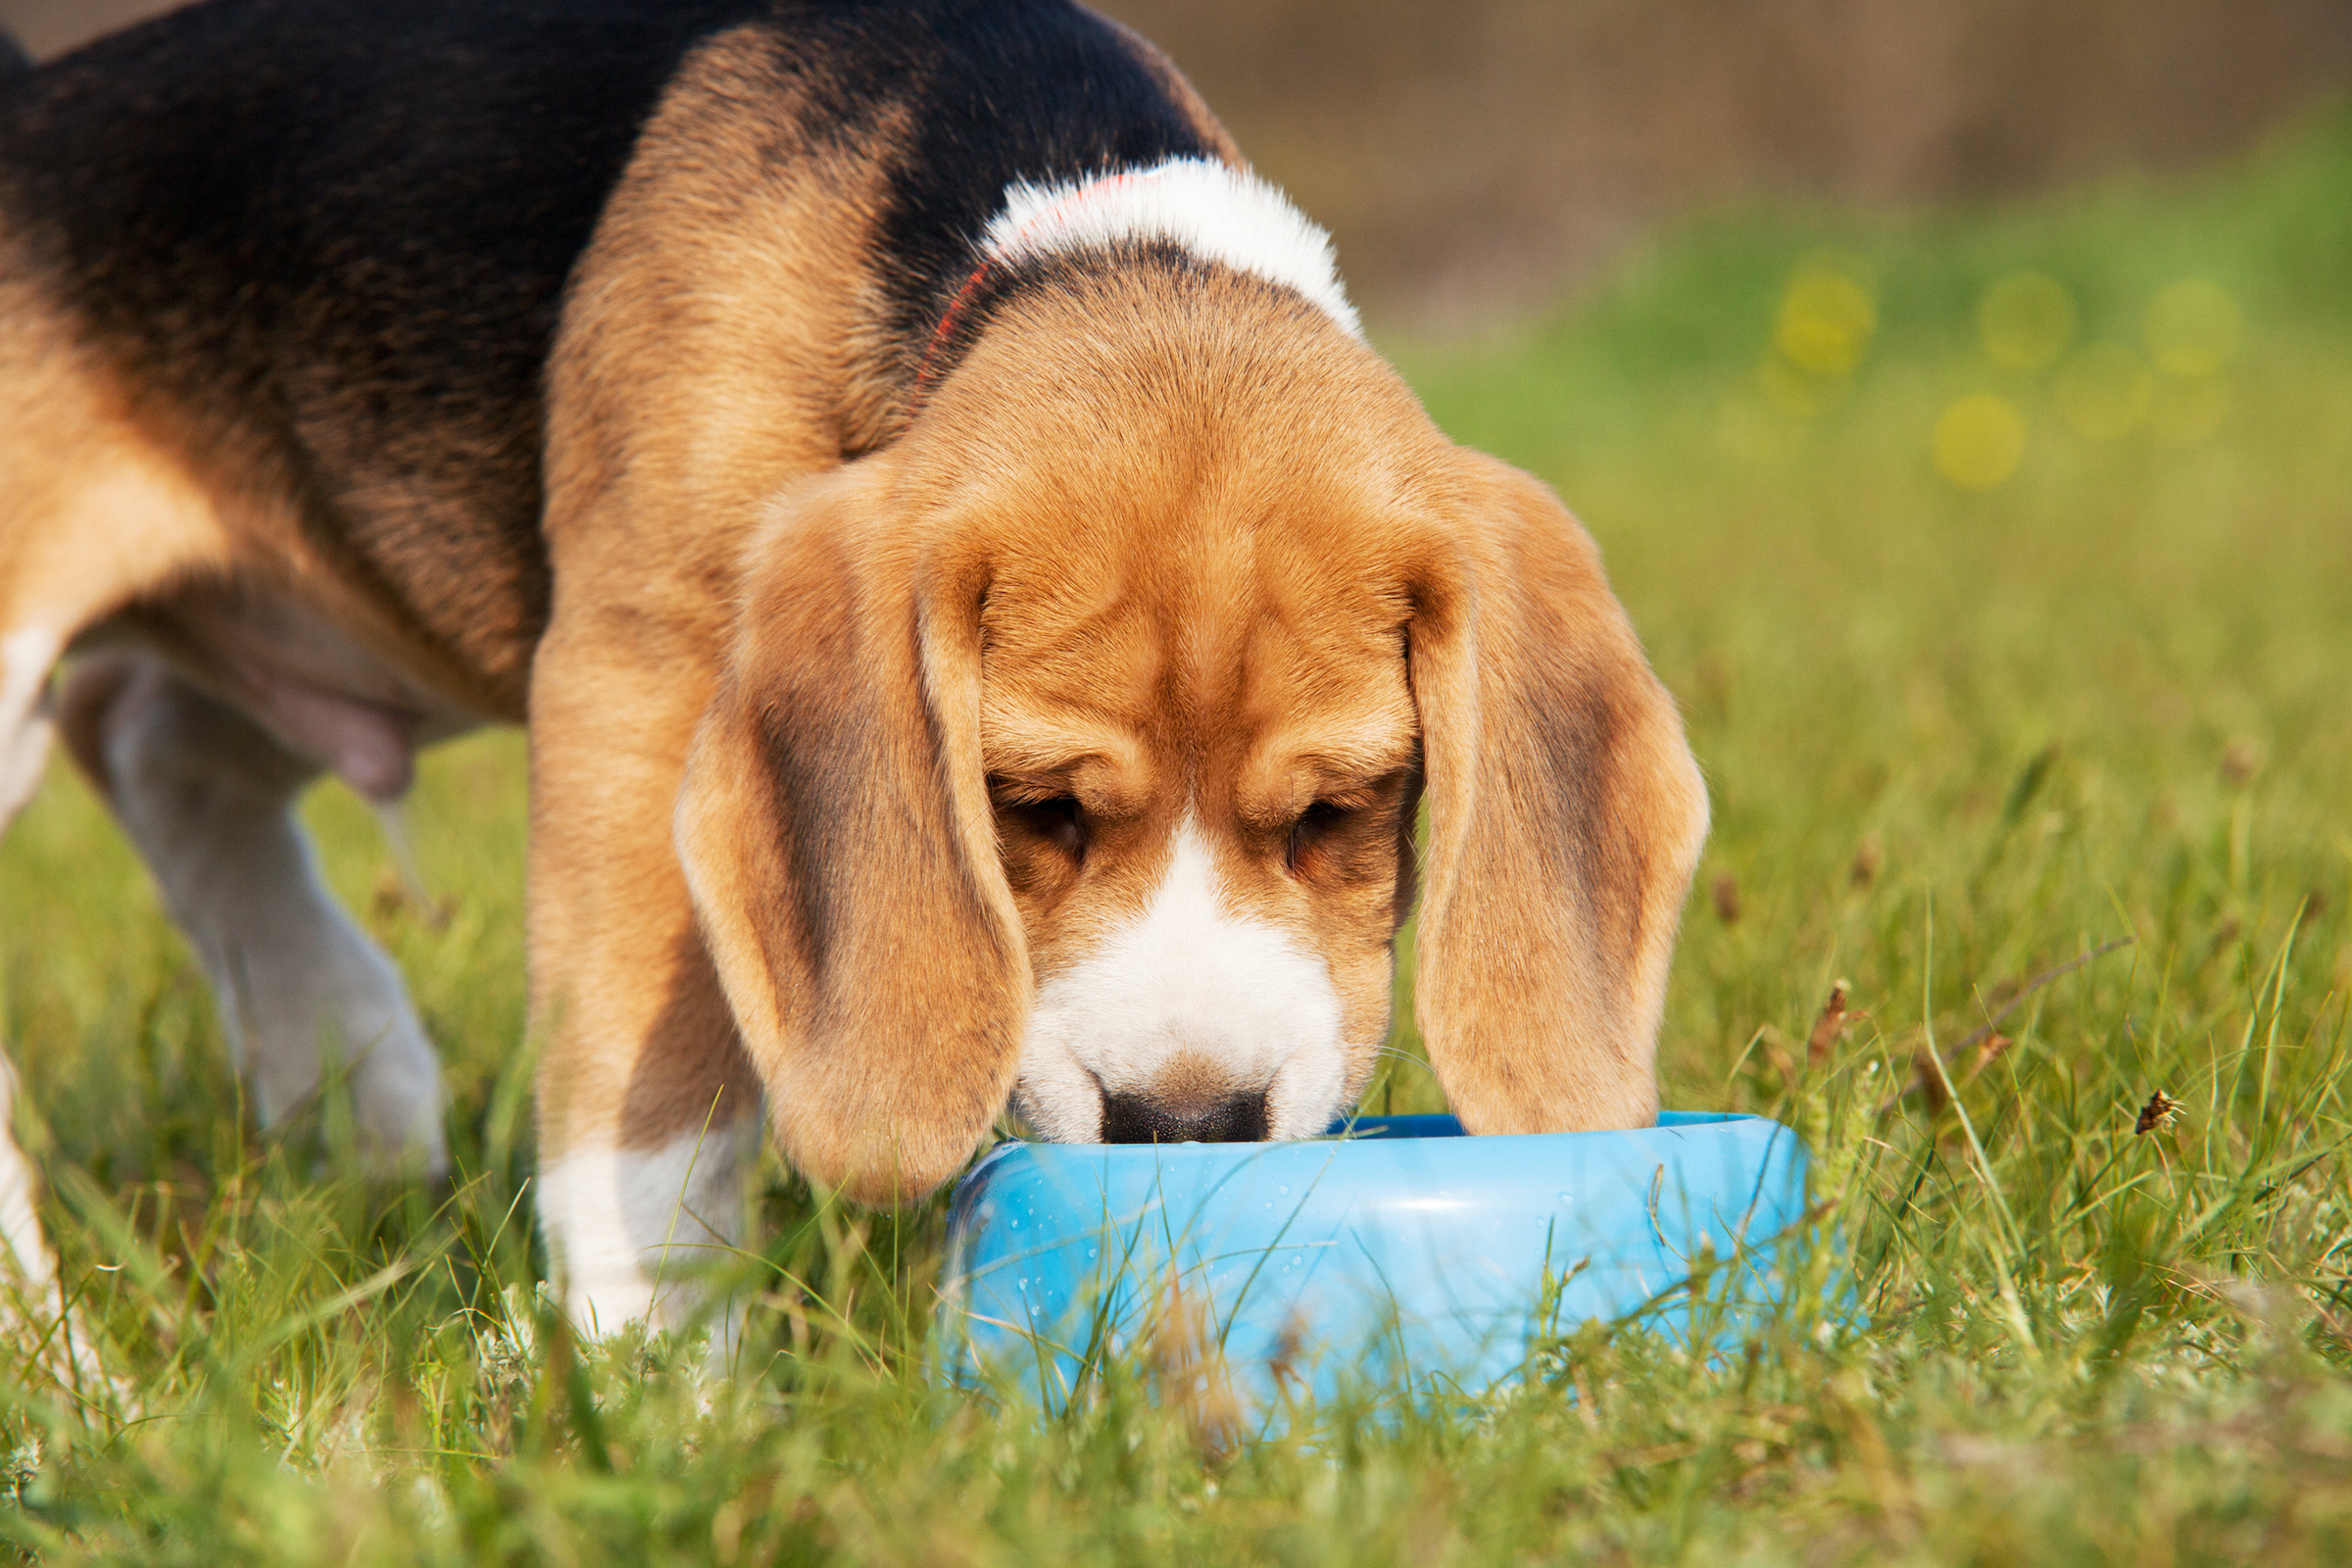 A beagle puppy eats from a blue food bowl in the grass